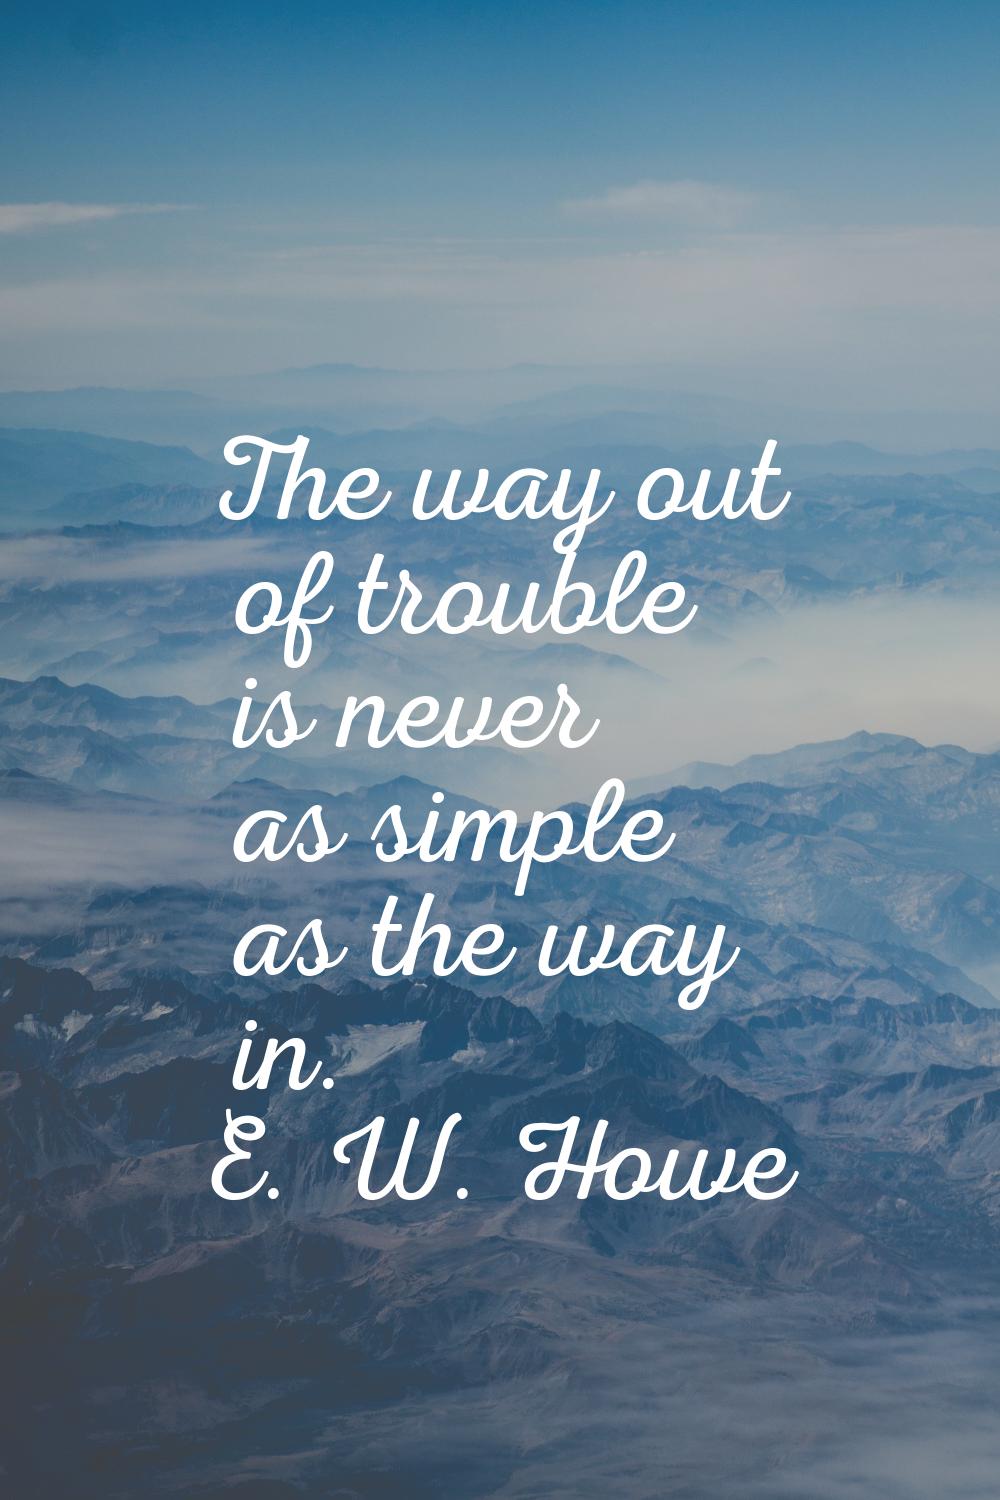 The way out of trouble is never as simple as the way in.